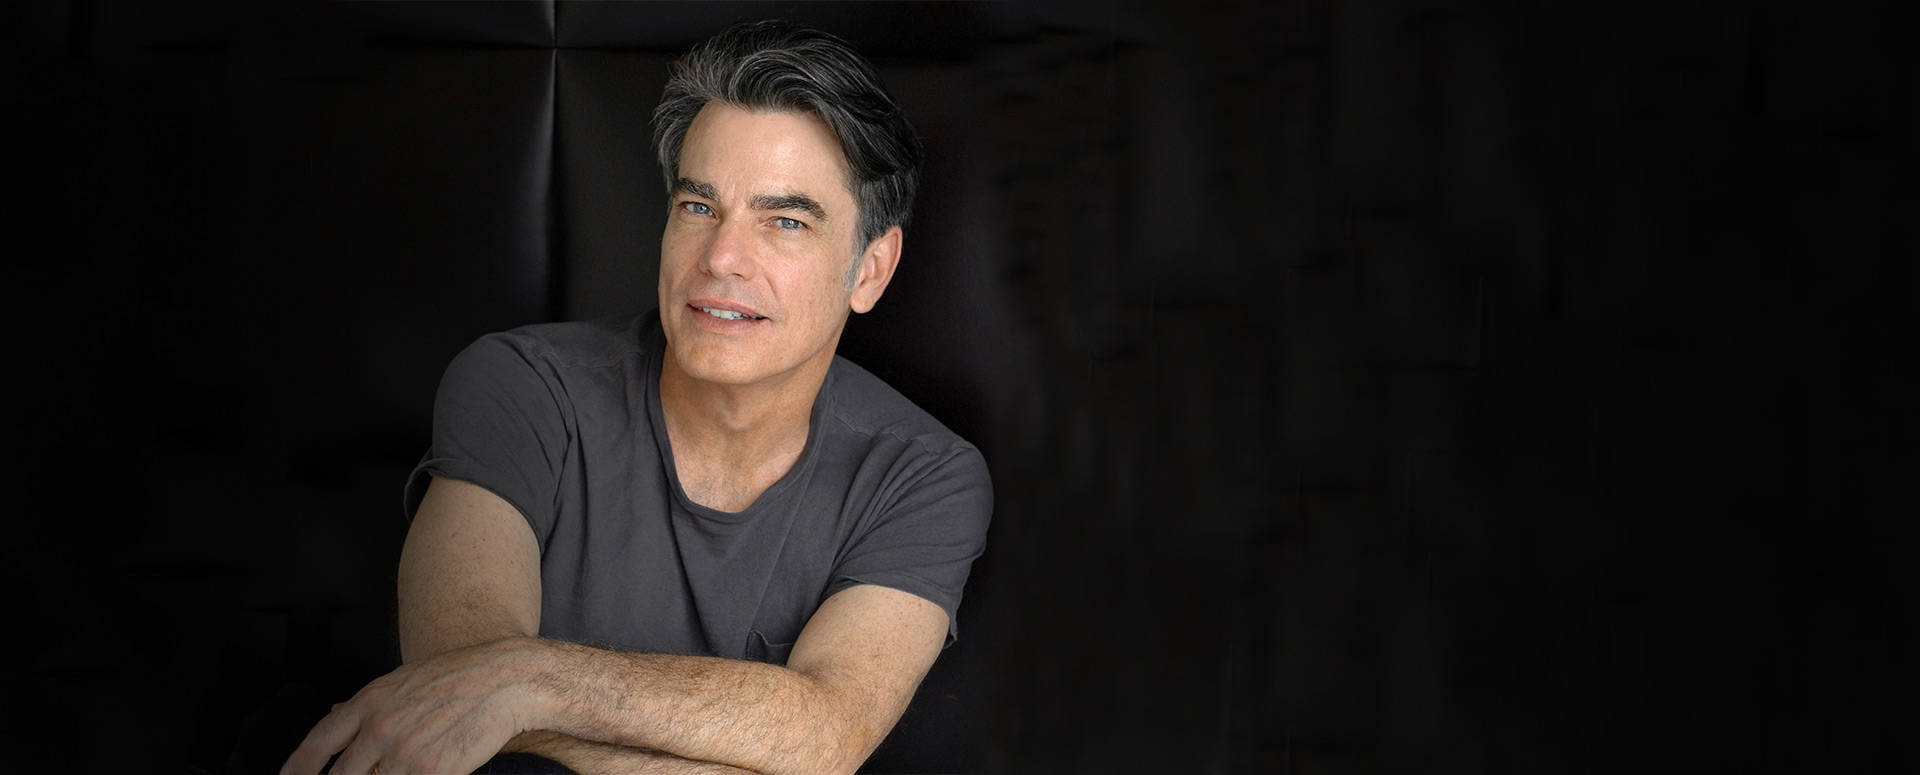 Peter  Gallagher